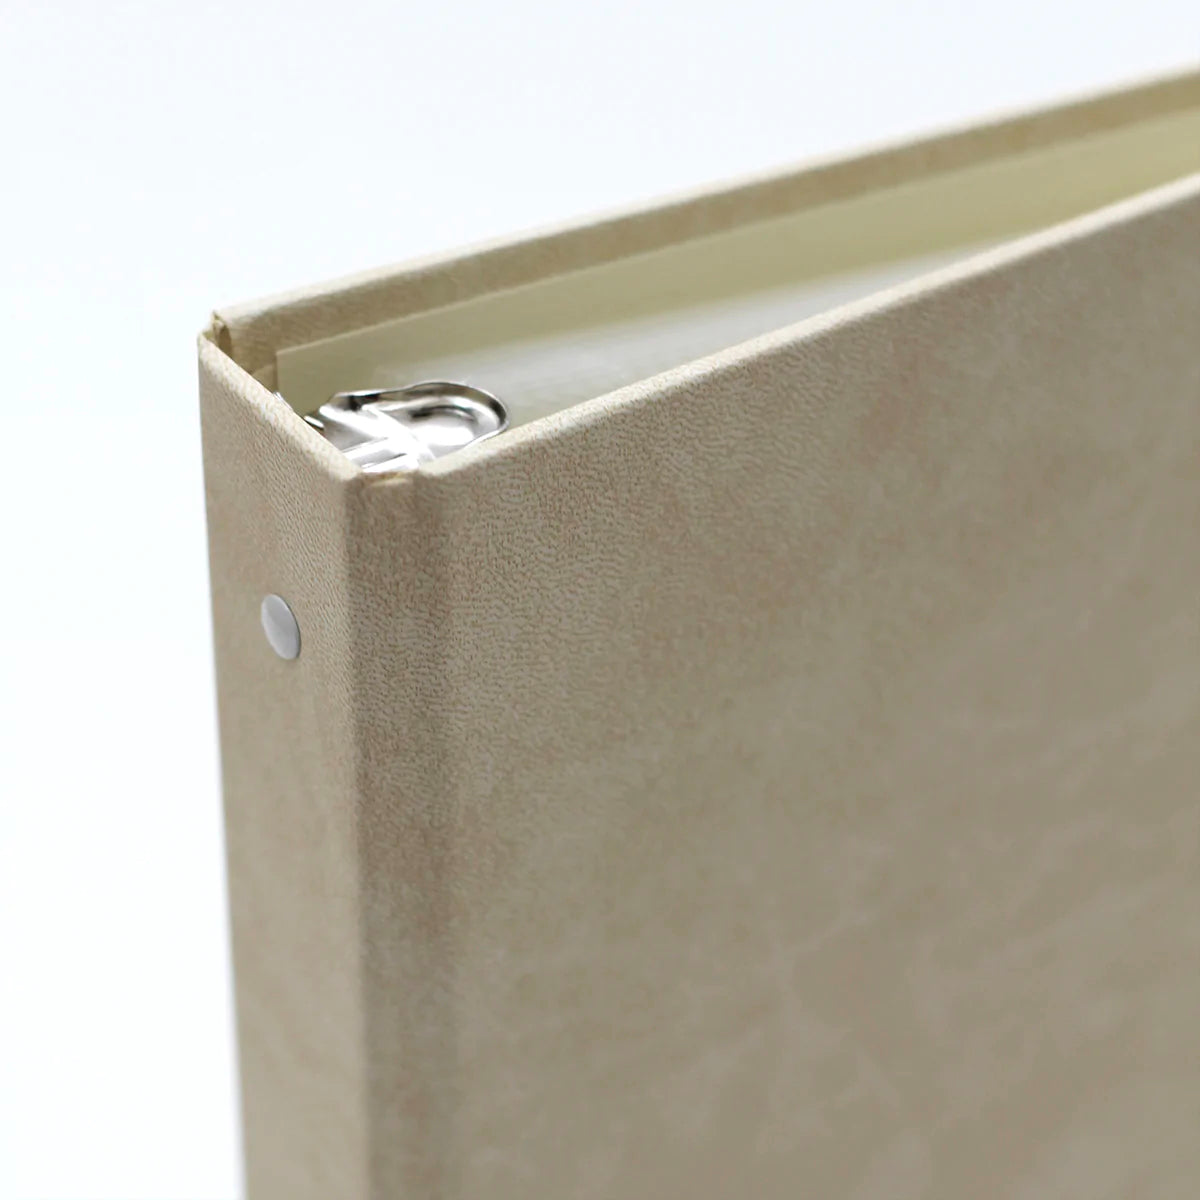 Large Photo Binder For 4x6 Photos | Cover: Creme Vegan Leather | Available Personalized